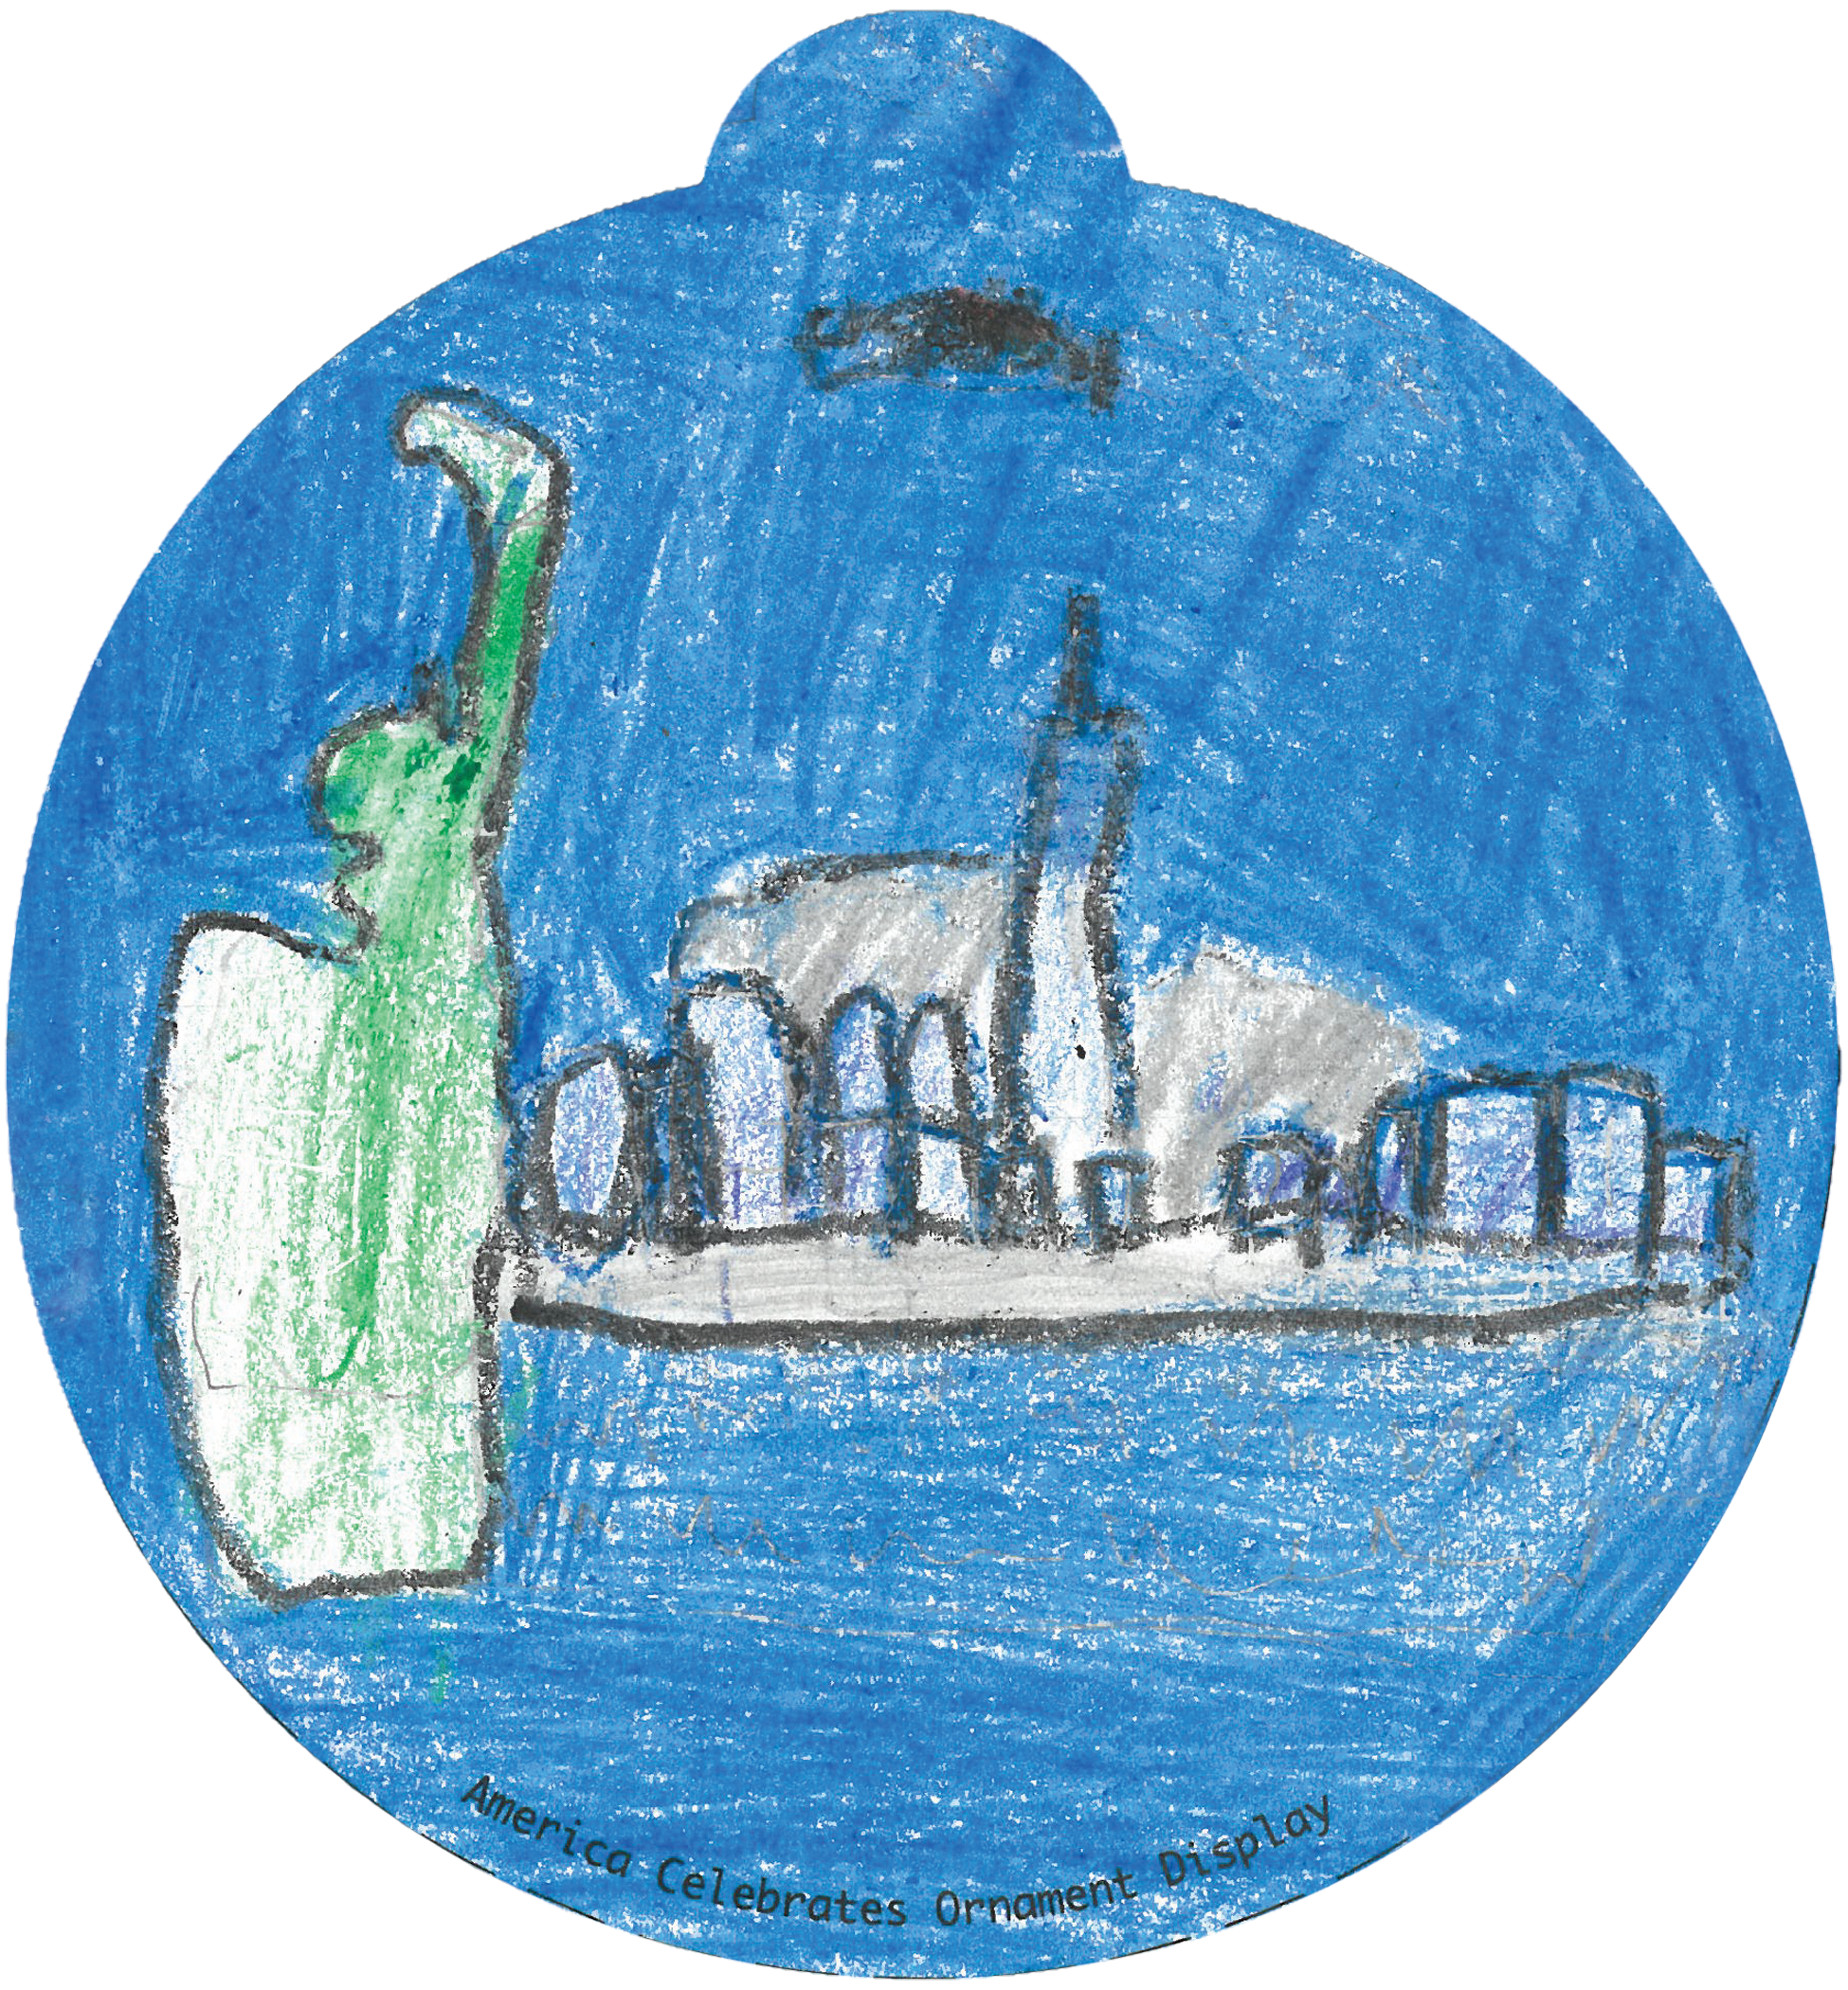 ornament depicting the New York City skyline, including the Statue of Liberty